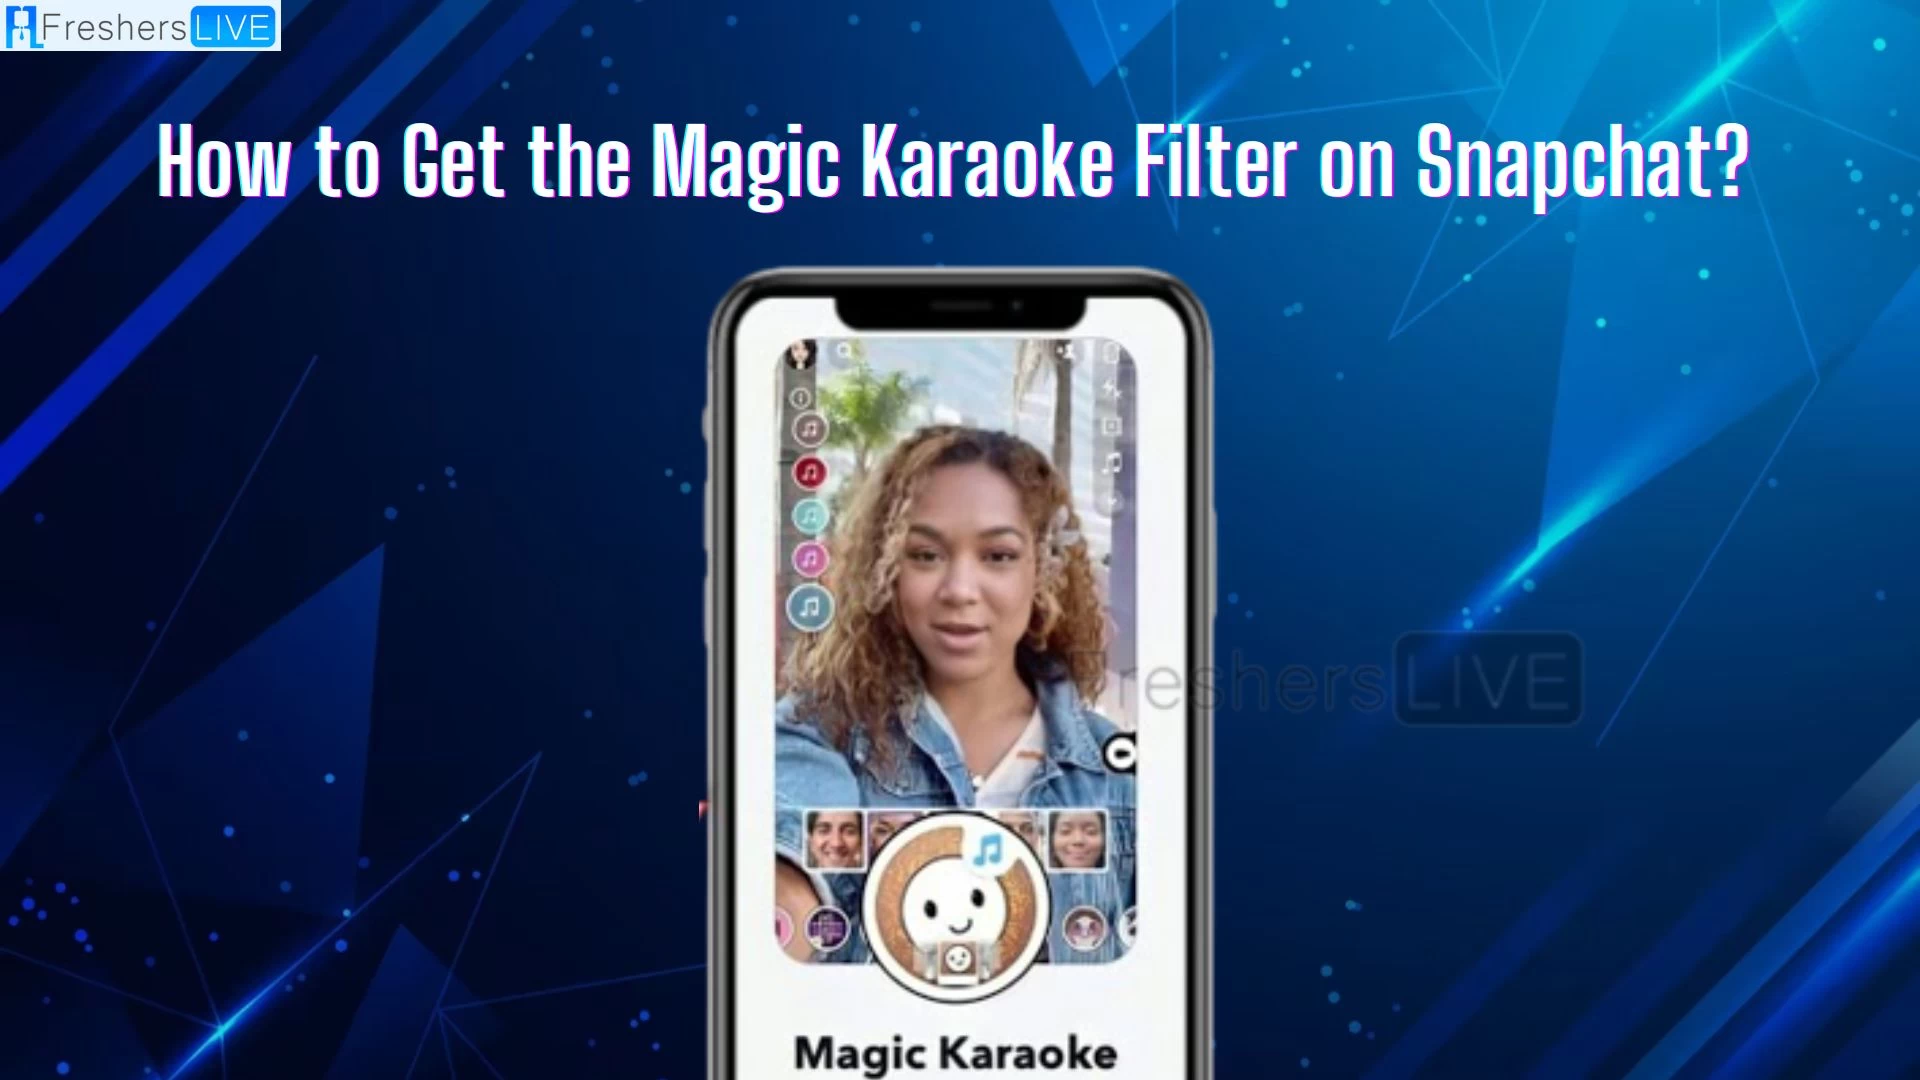 Snapchat Filter That Makes Pictures Sing, How to Get the Magic Karaoke Filter on Snapchat?